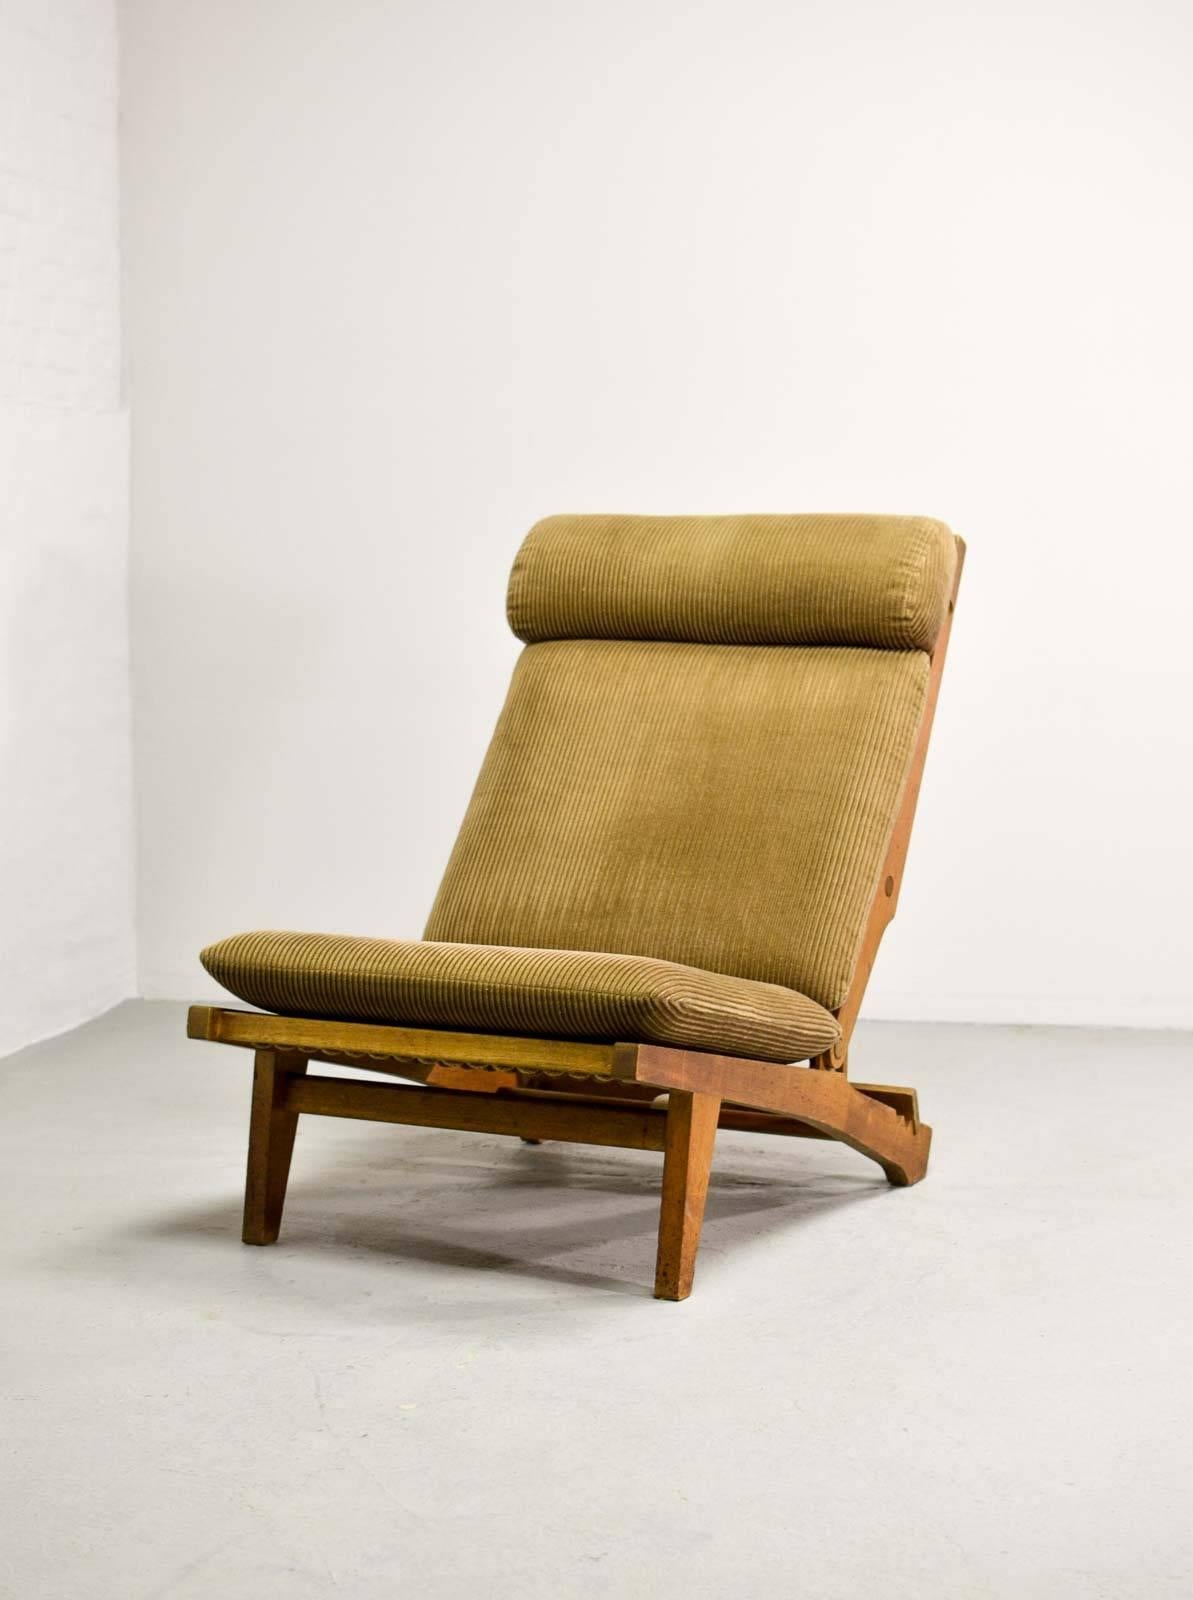 Rare lounge chair, model AP71 designed in 1968 by the Scandinavian master designer Hans J. Wegner for AP Stolen. The solid folding oak frame with adjustable back and headrest is upholstered with a warm milk chocolate brown corduroy upholstery. The